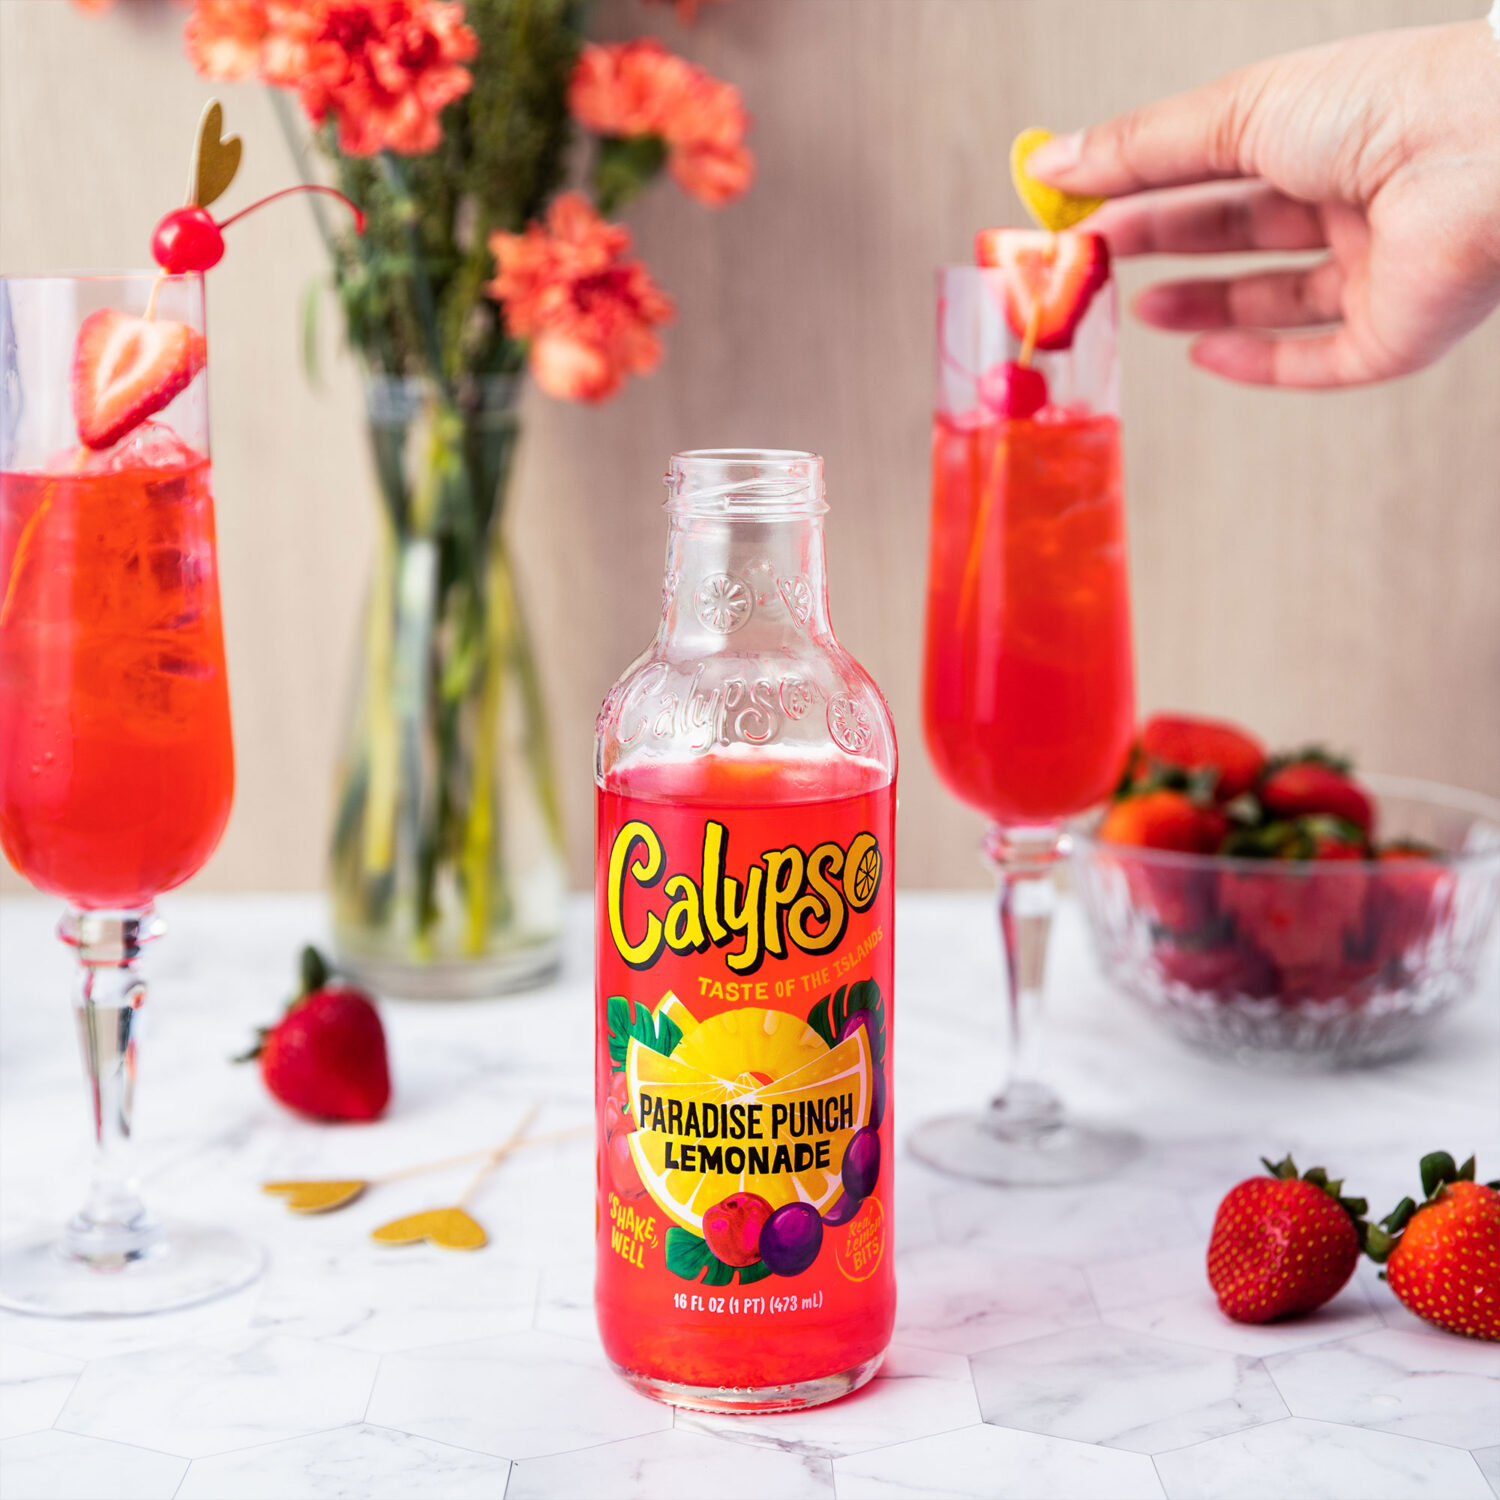 Calypso Paradise Punch Lemonade in a champaign flute with festive garnish.